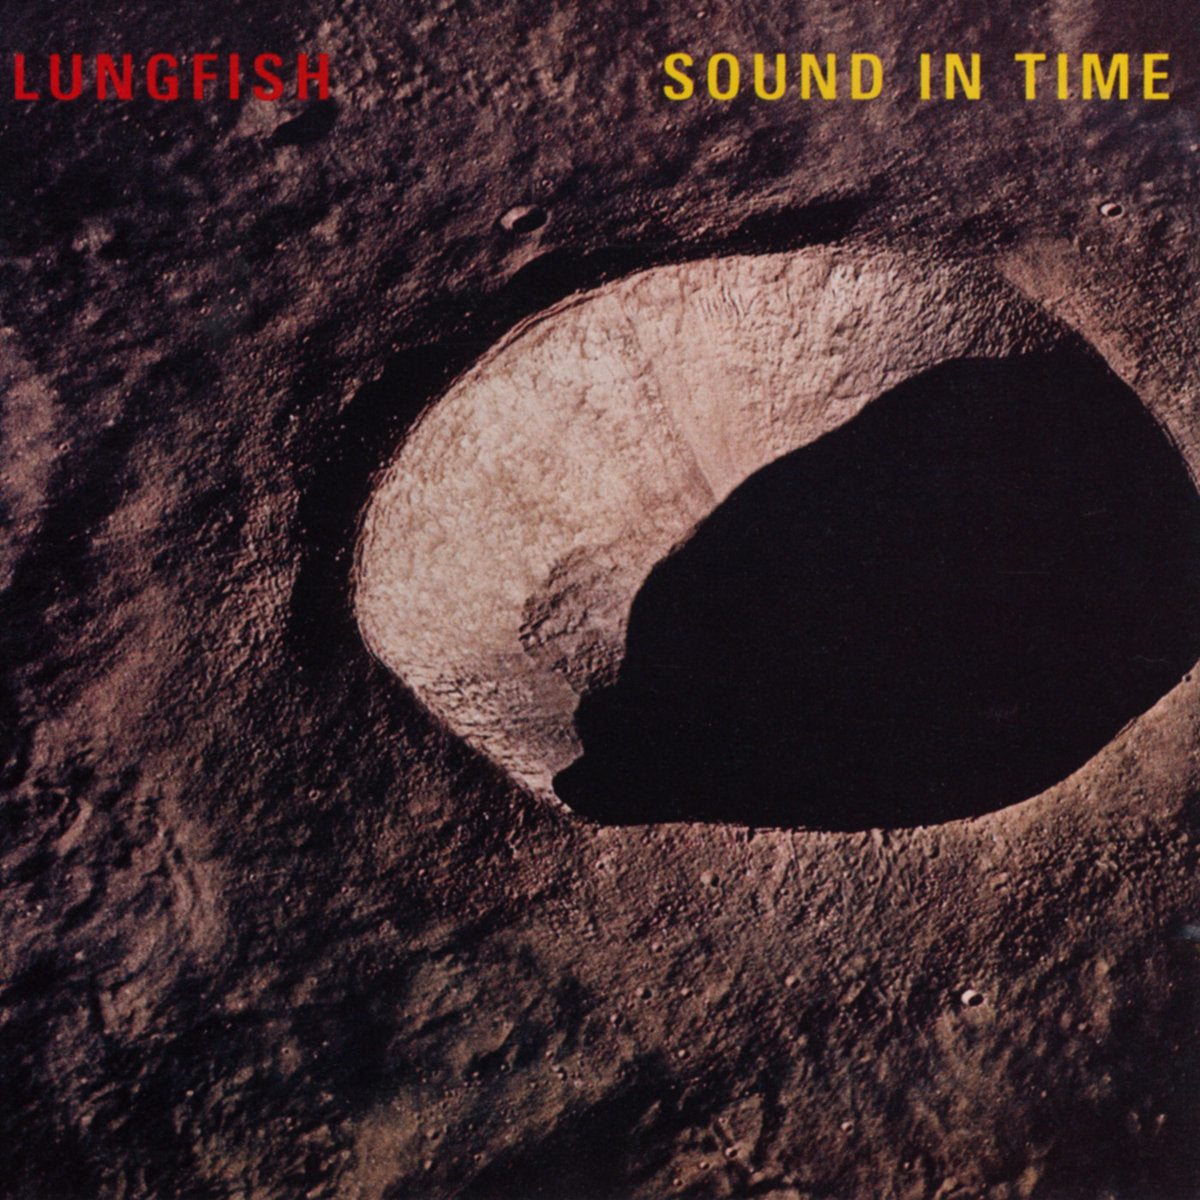 LUNGFISH "SOUND IN TIME"